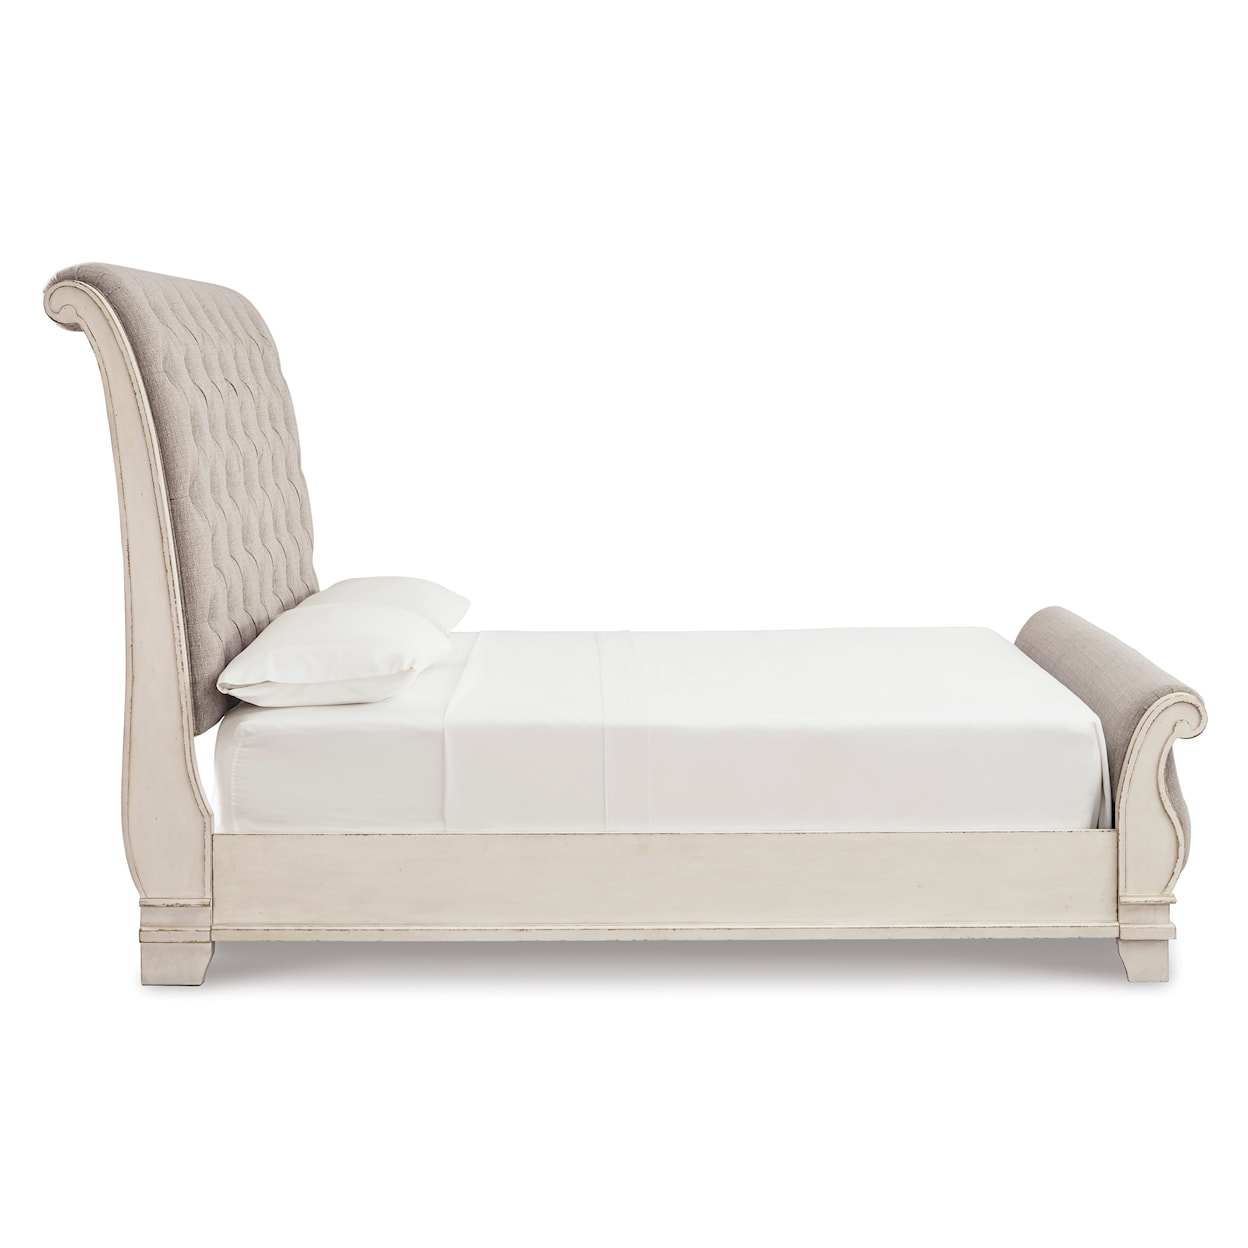 Signature Design by Ashley Claire King Upholstered Sleigh Bed